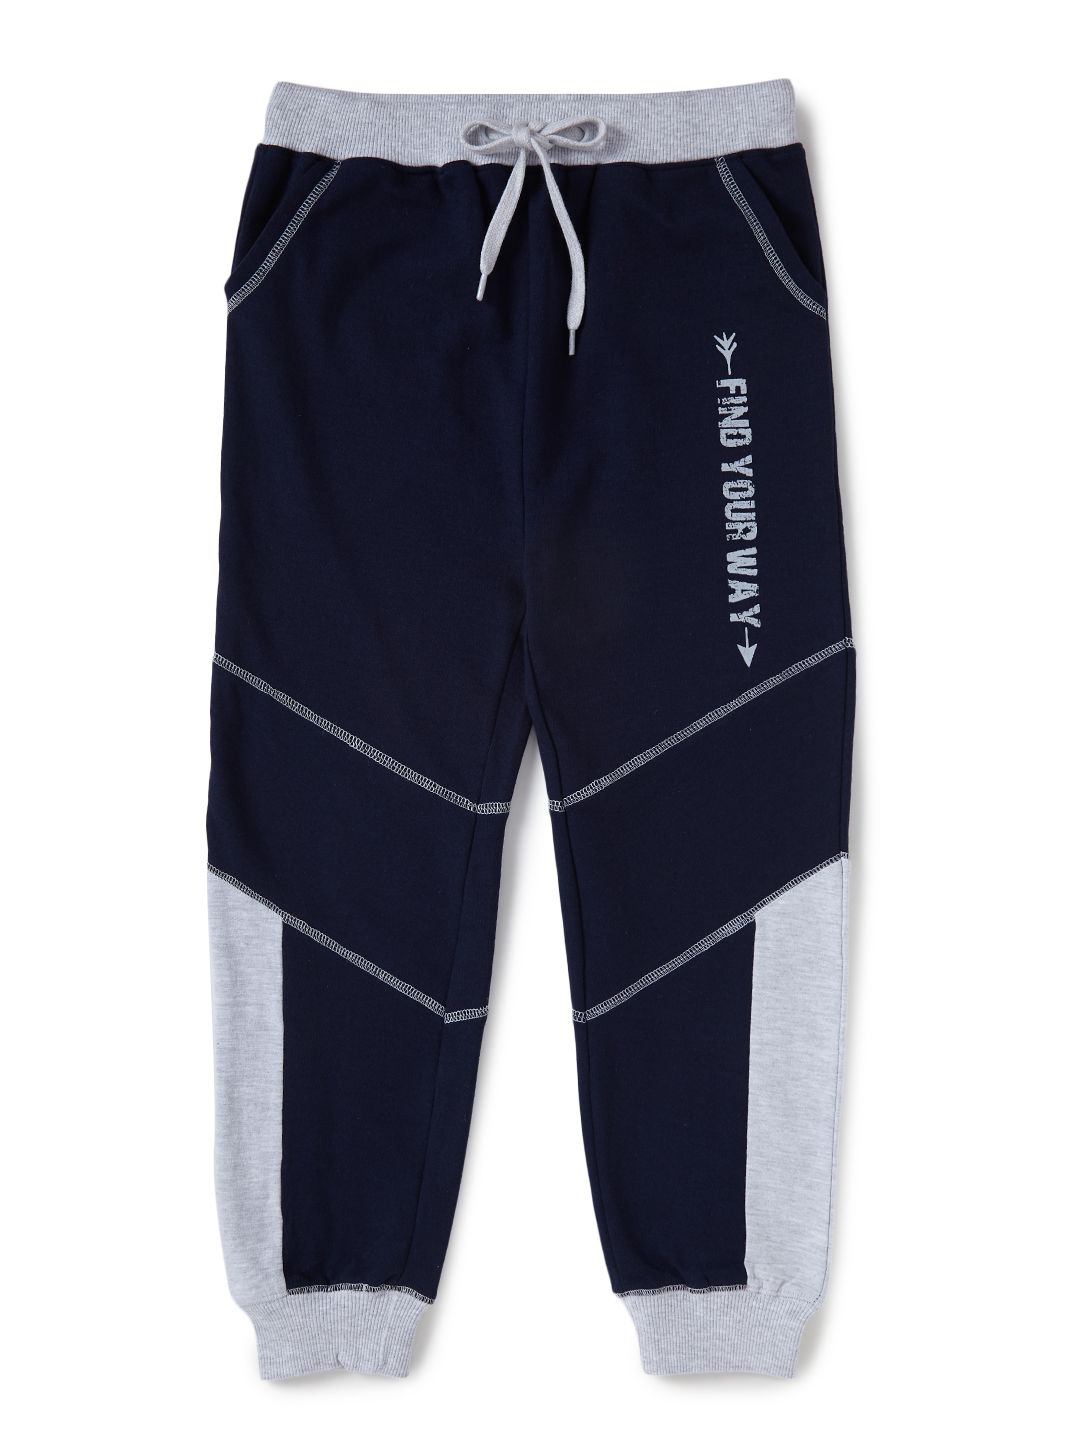 Boys Cotton Track Pant - Cut and Sew Pattern (Dark Blue , 4-12 years)